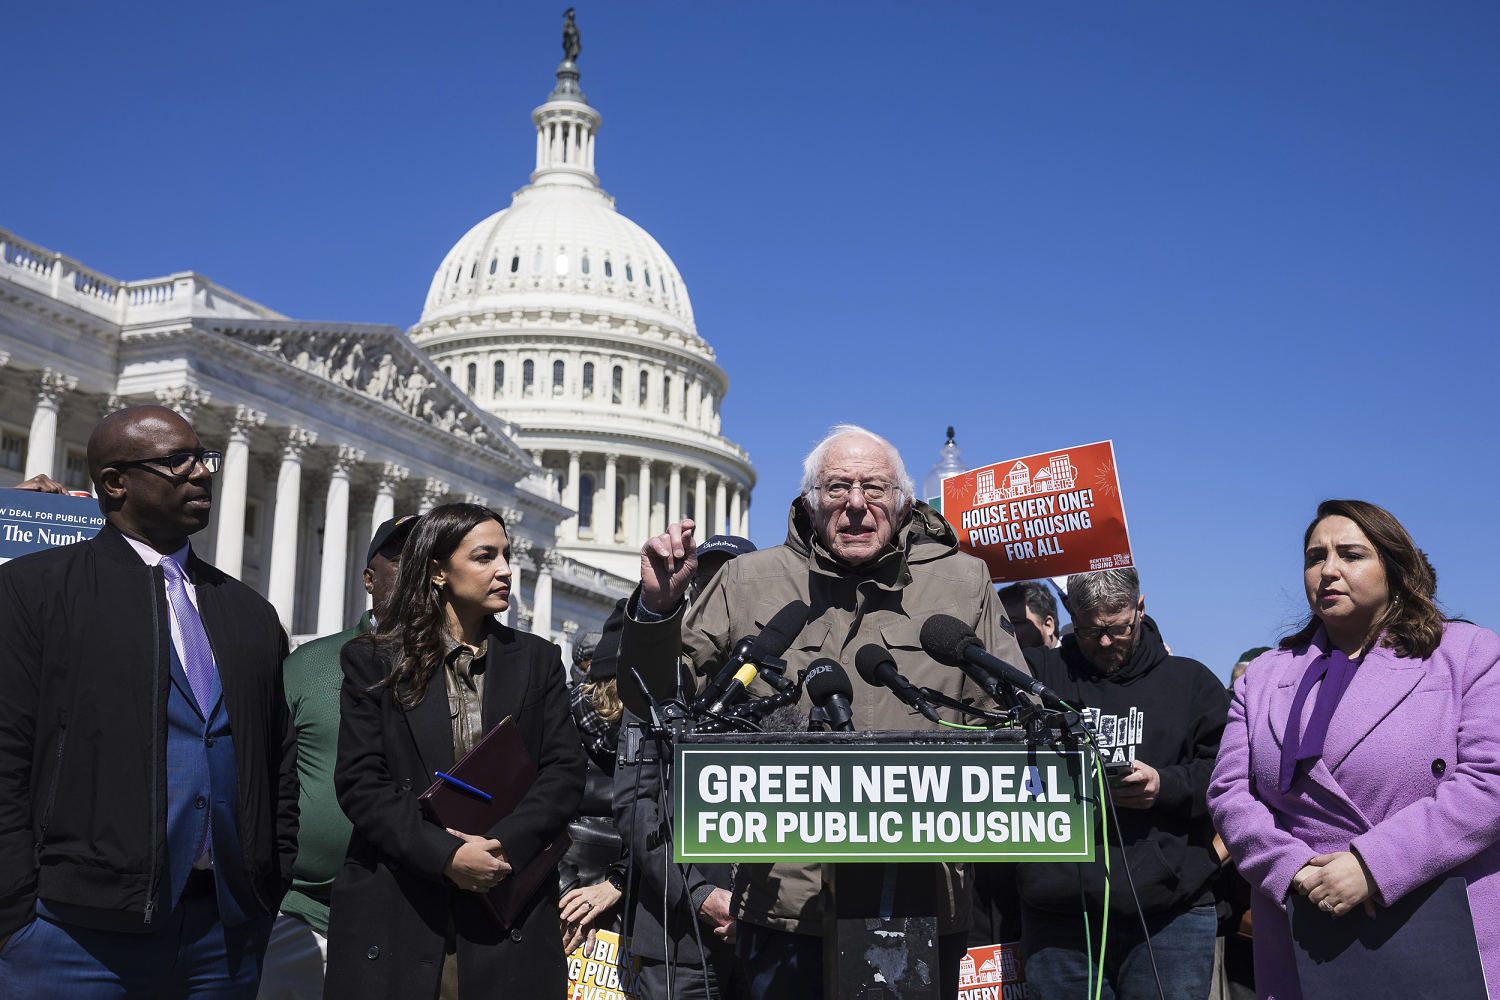 Sen. Sanders and Rep. Ocasio-Cortez: Our Green New Deal for Public Housing is a win-win-win for America